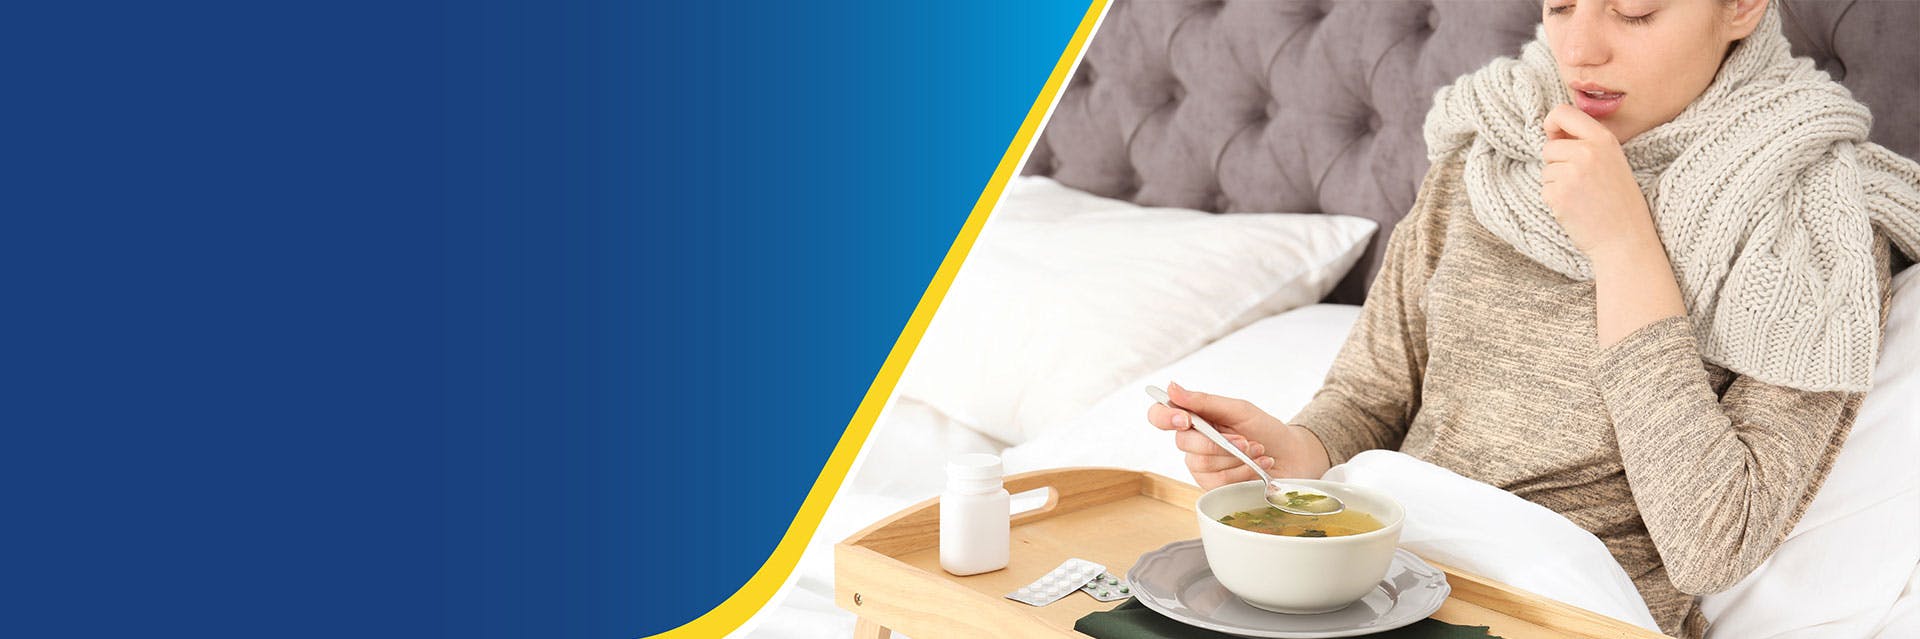 Young sick woman lying in bed eating broth off of a bed tray